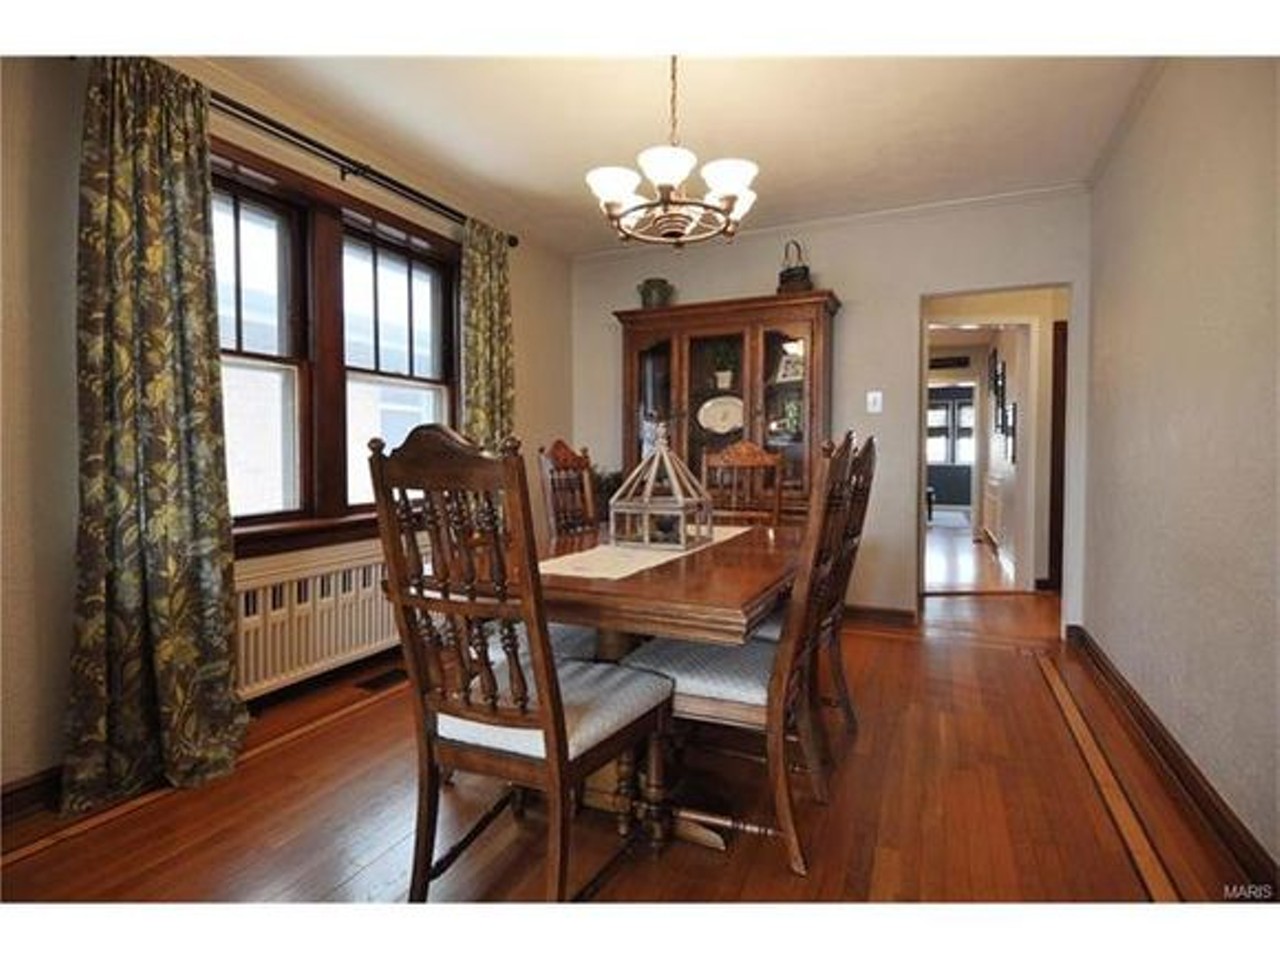 There are hardwood floors throughout the house.